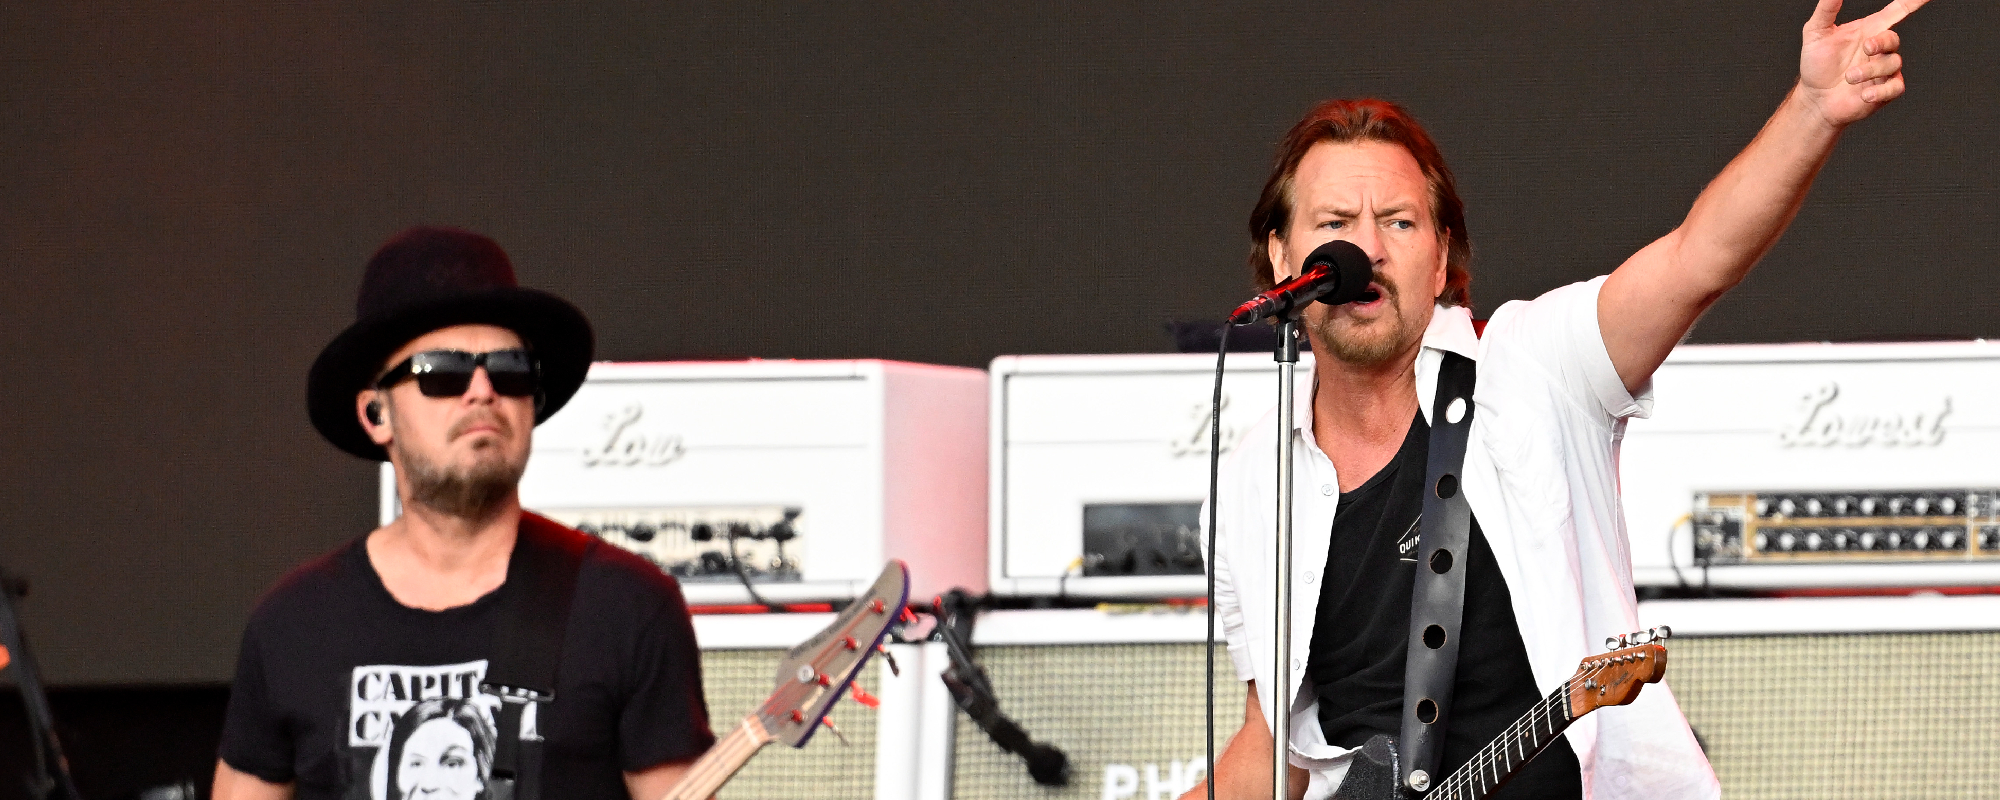 Pearl Jam’s Jeff Ament and Eddie Vedder “Have Huge Props” for Taylor Swift